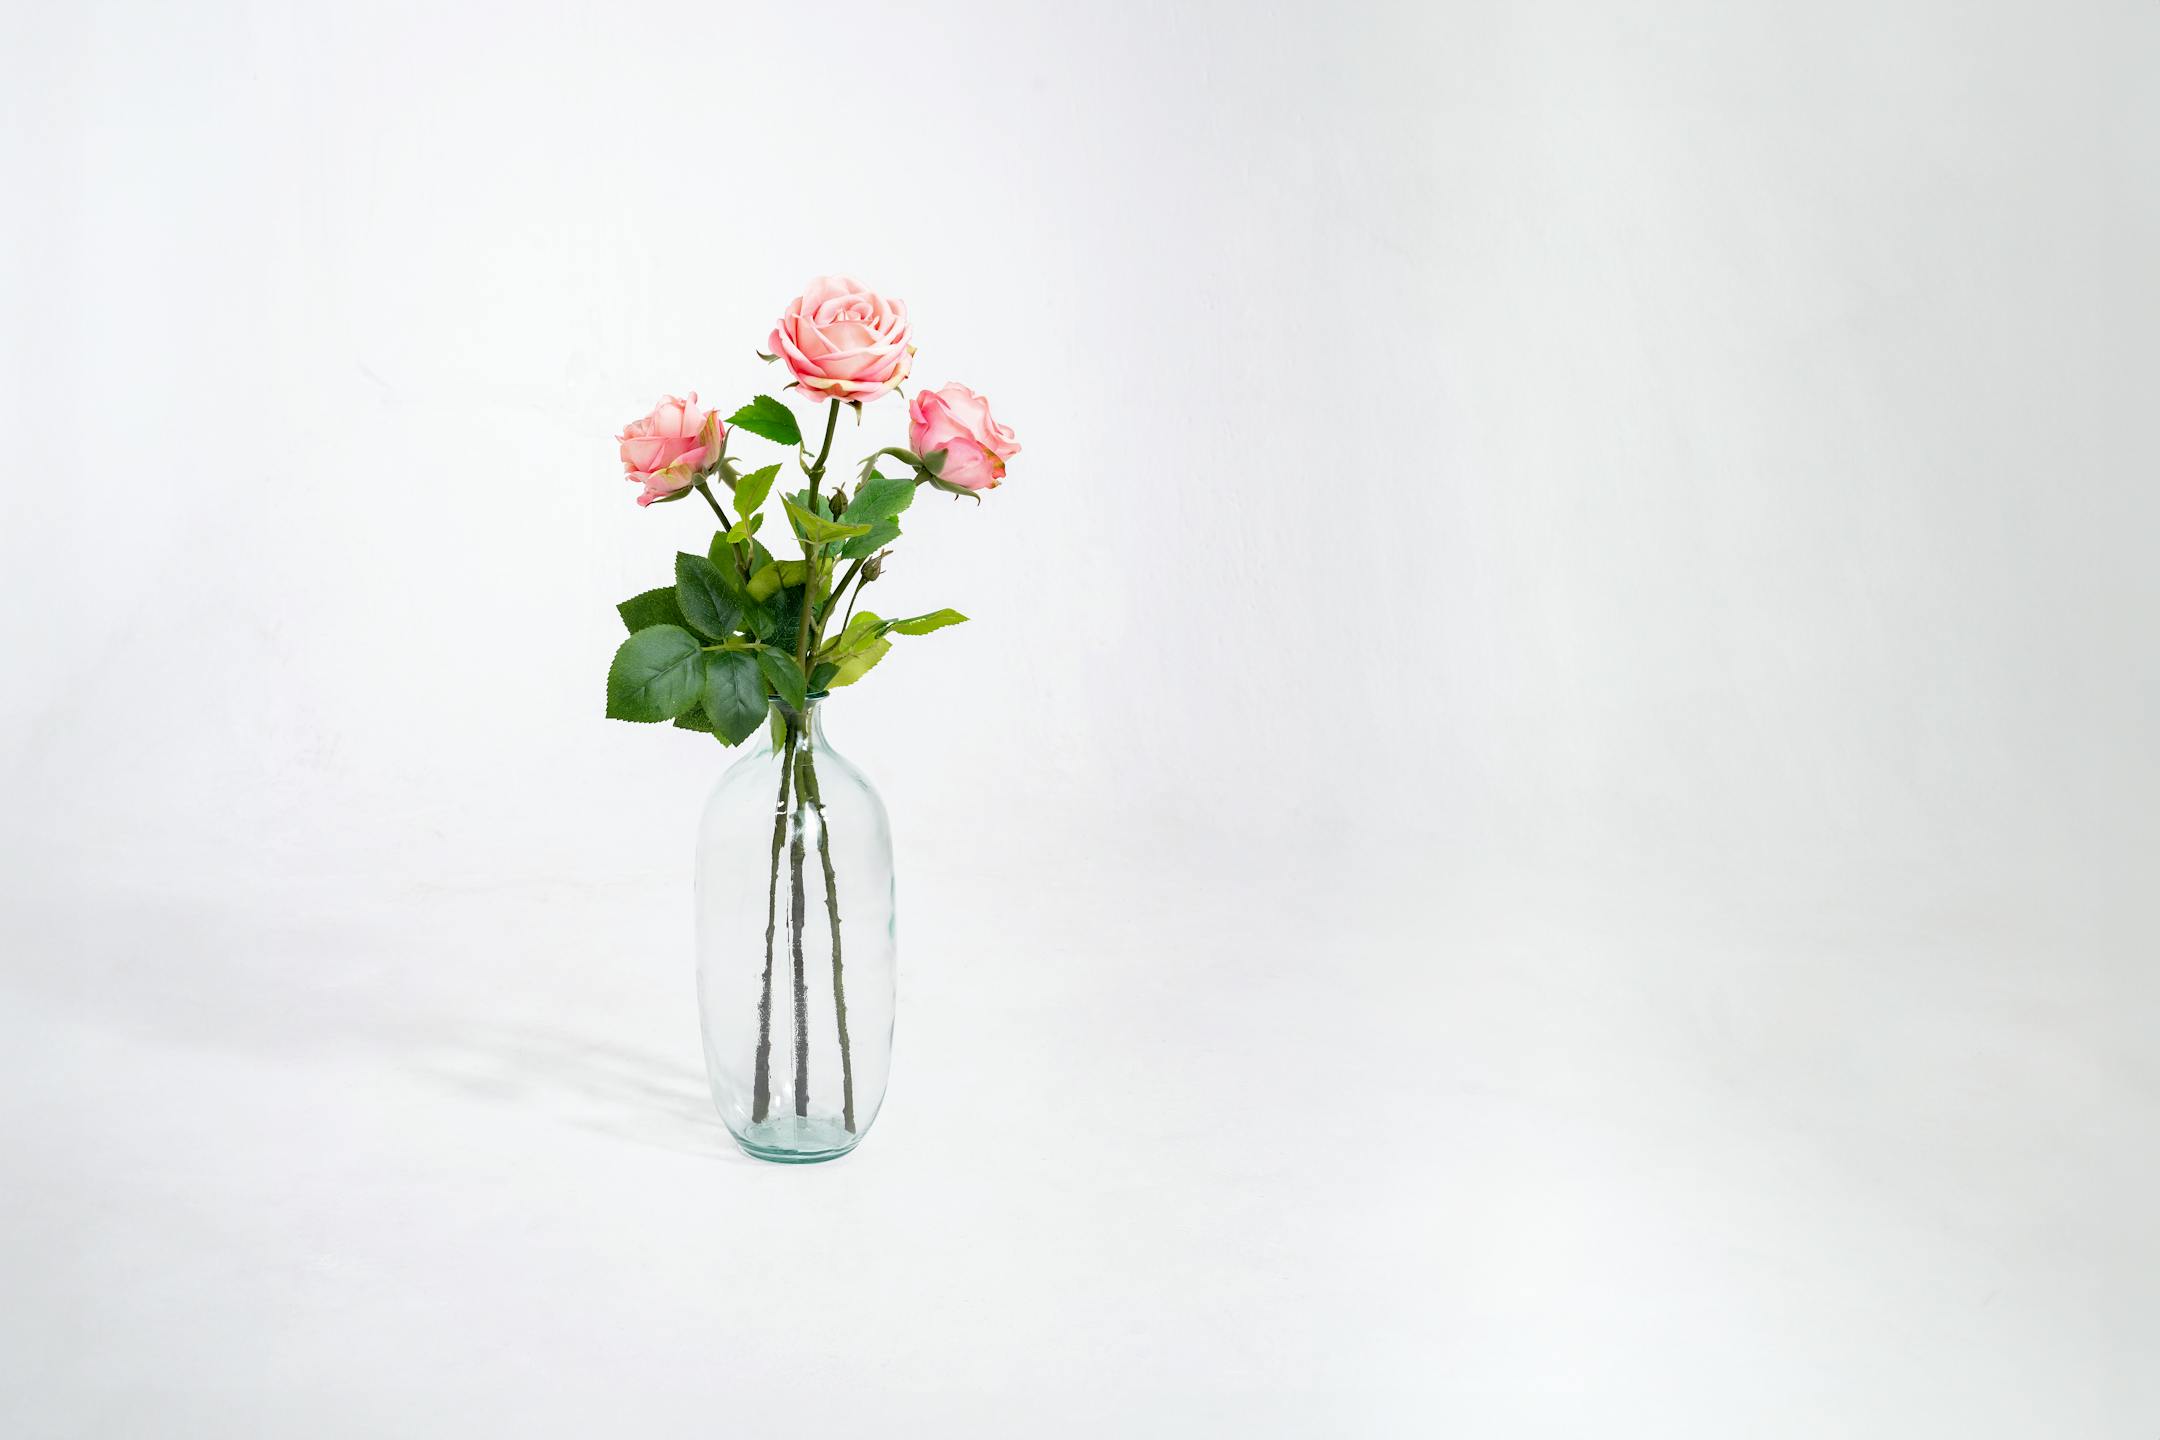 Three light pink artificial rose stems in glass vase